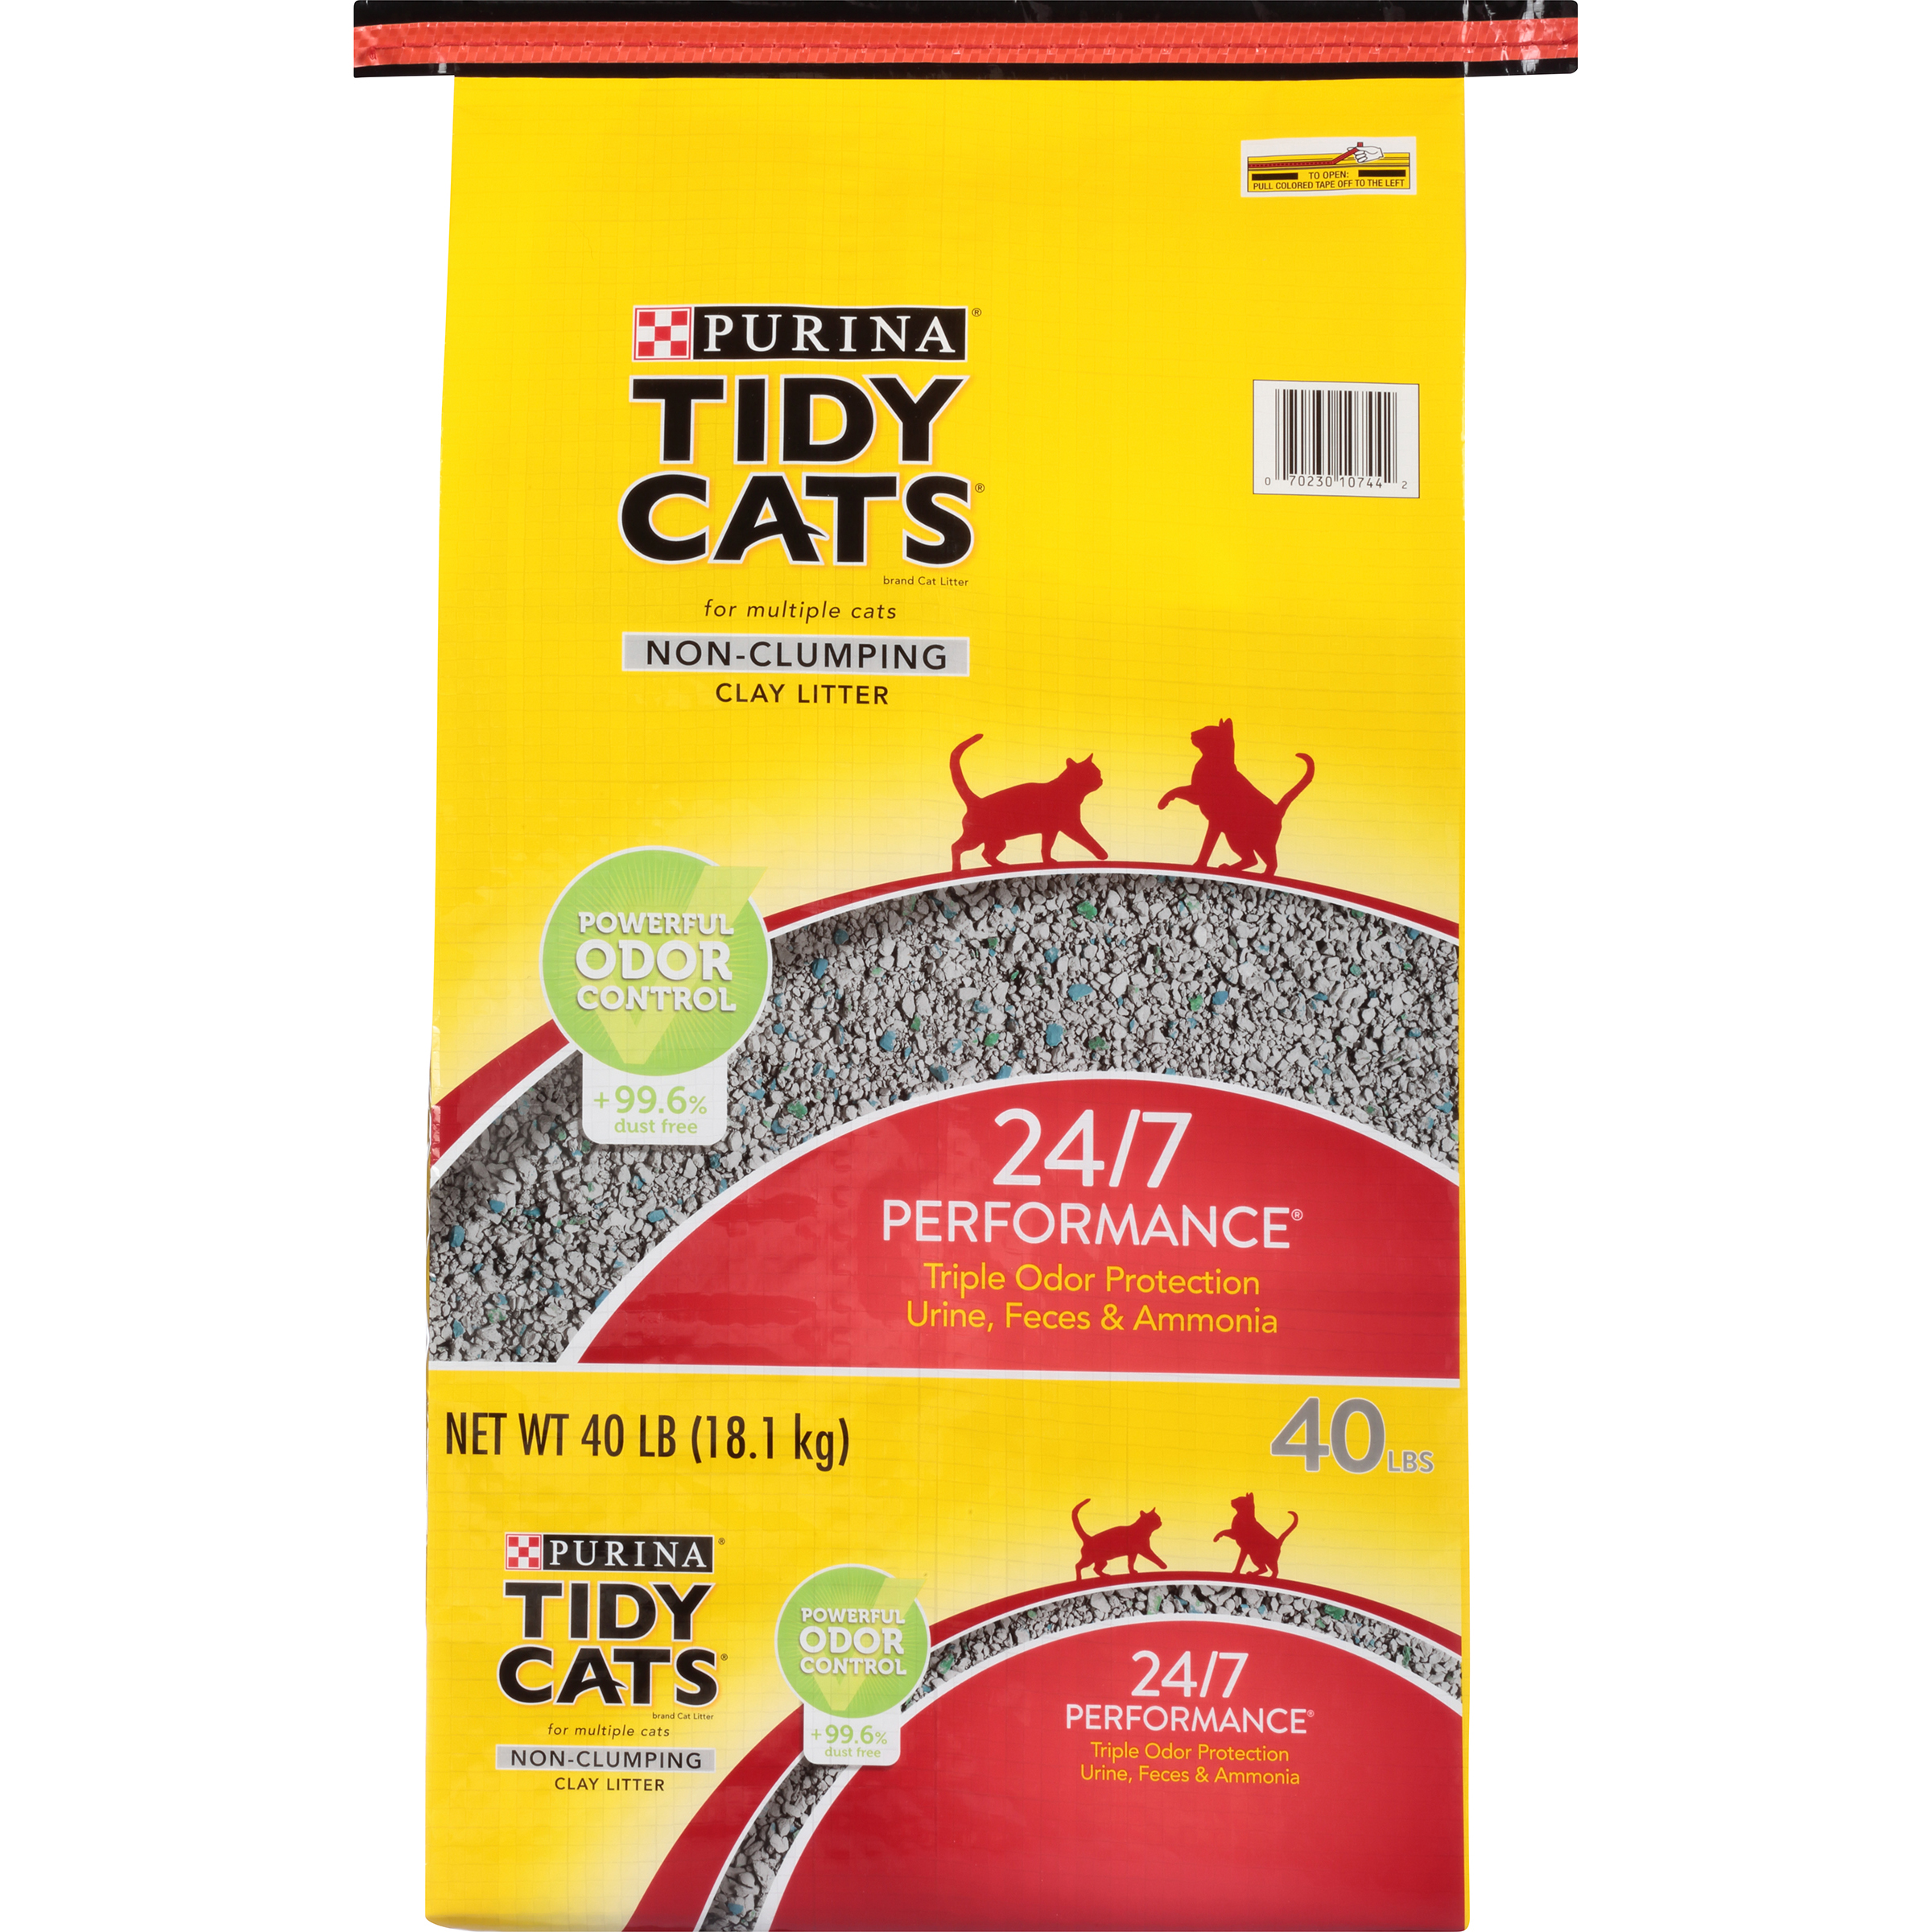 Purina Tidy Cats Non Clumping 24/7 Performance Multi Cat Litter 40# bag